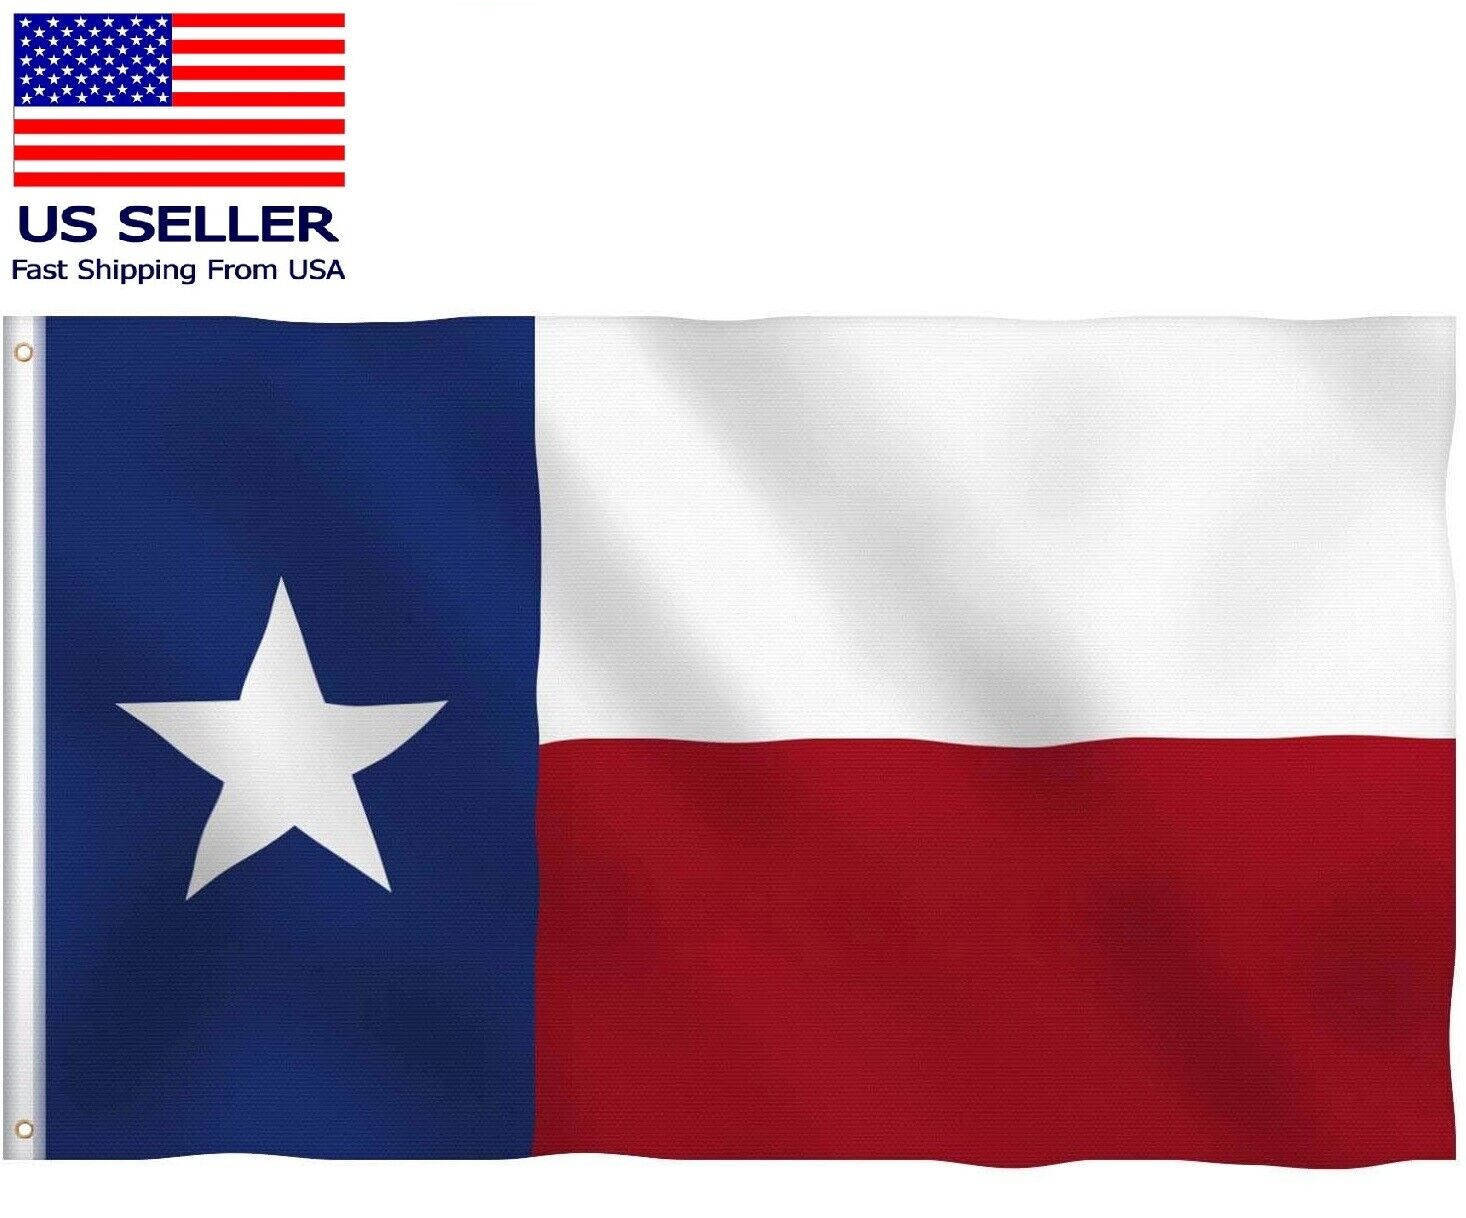 Texas Lone Star TX State Flag Brass Grommets Thick Fabric Double Stitch 3x5 feet